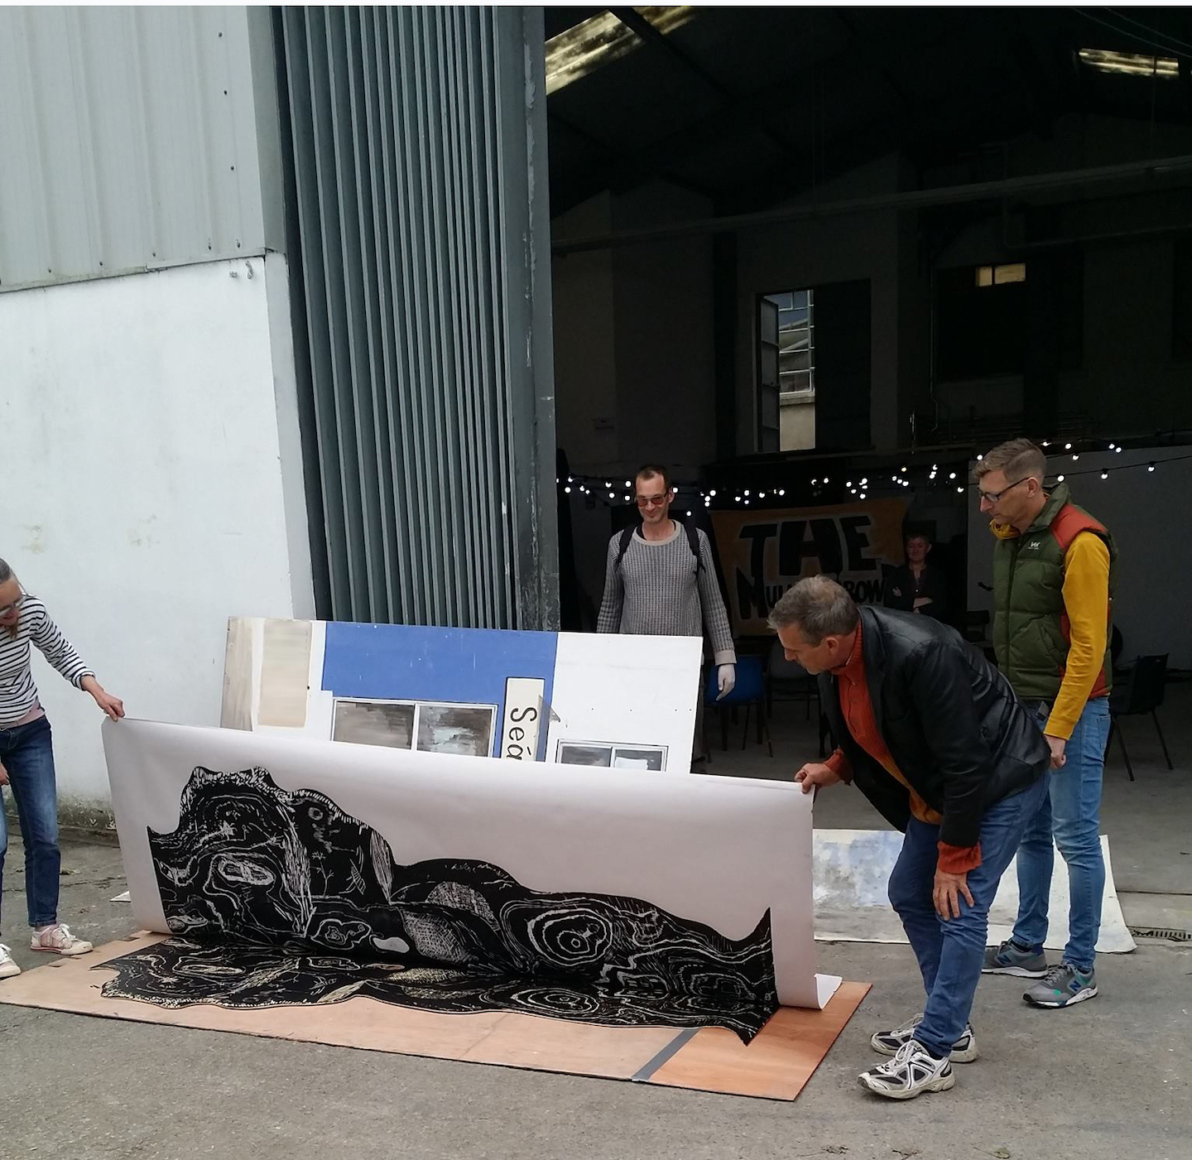 Phoebe Dick and Liz Byrne, an image of a section of a large woodblock collaboratively created during the Evidence of Small Behaviours symposium, printed using the Leitrim Sculpture Centre forklift, 2015.